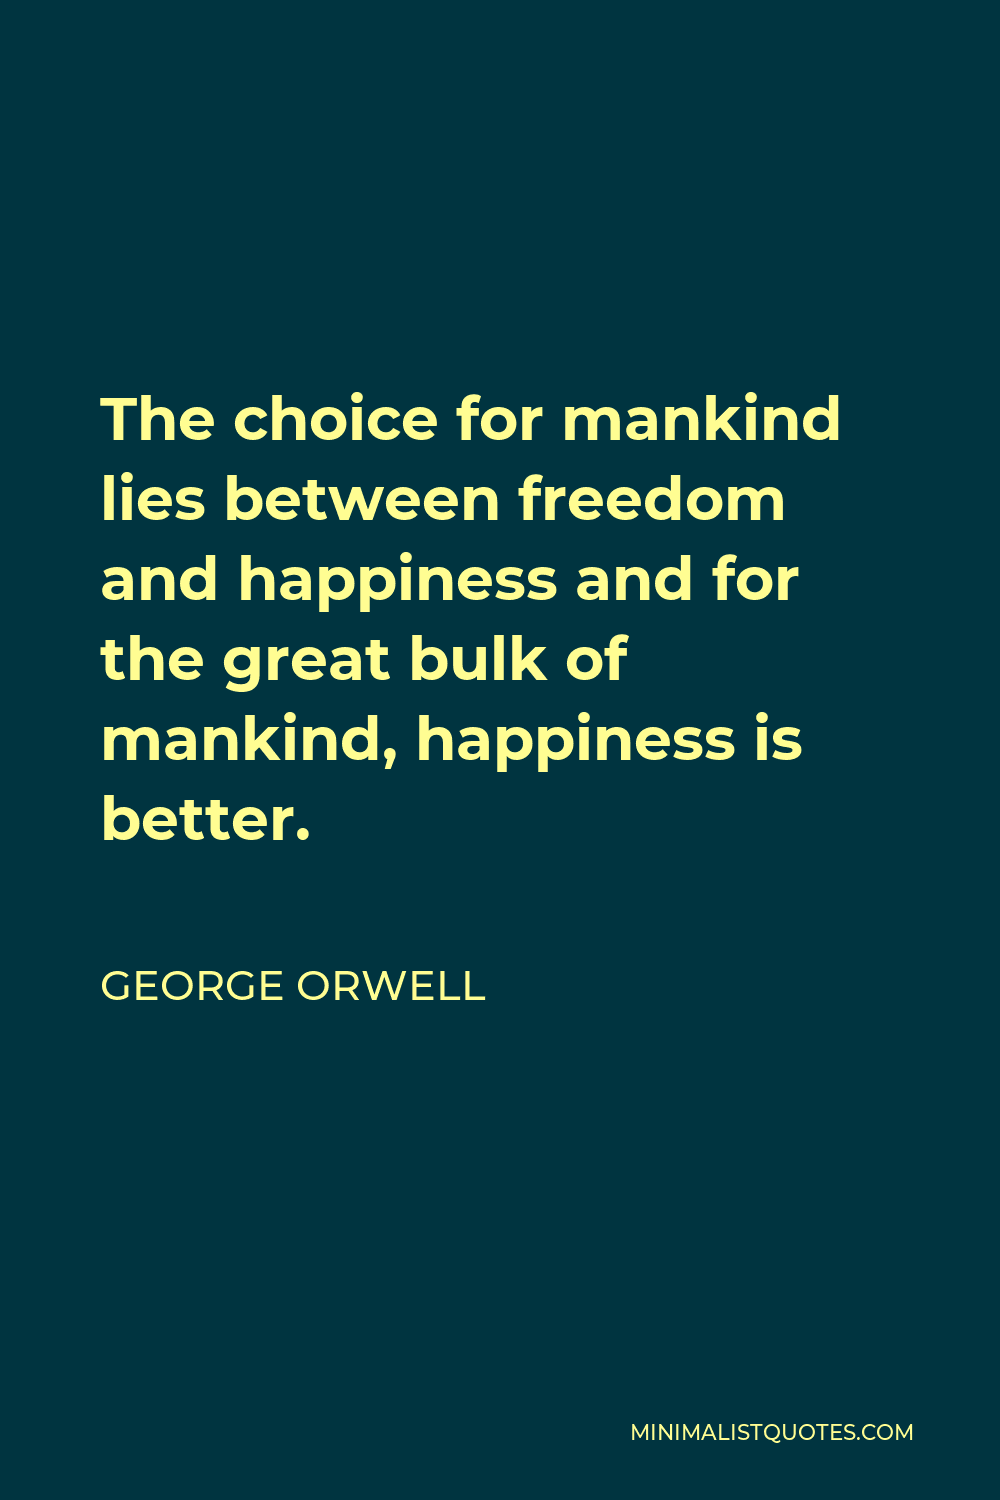 George Orwell Quote - The choice for mankind lies between freedom and happiness and for the great bulk of mankind, happiness is better.